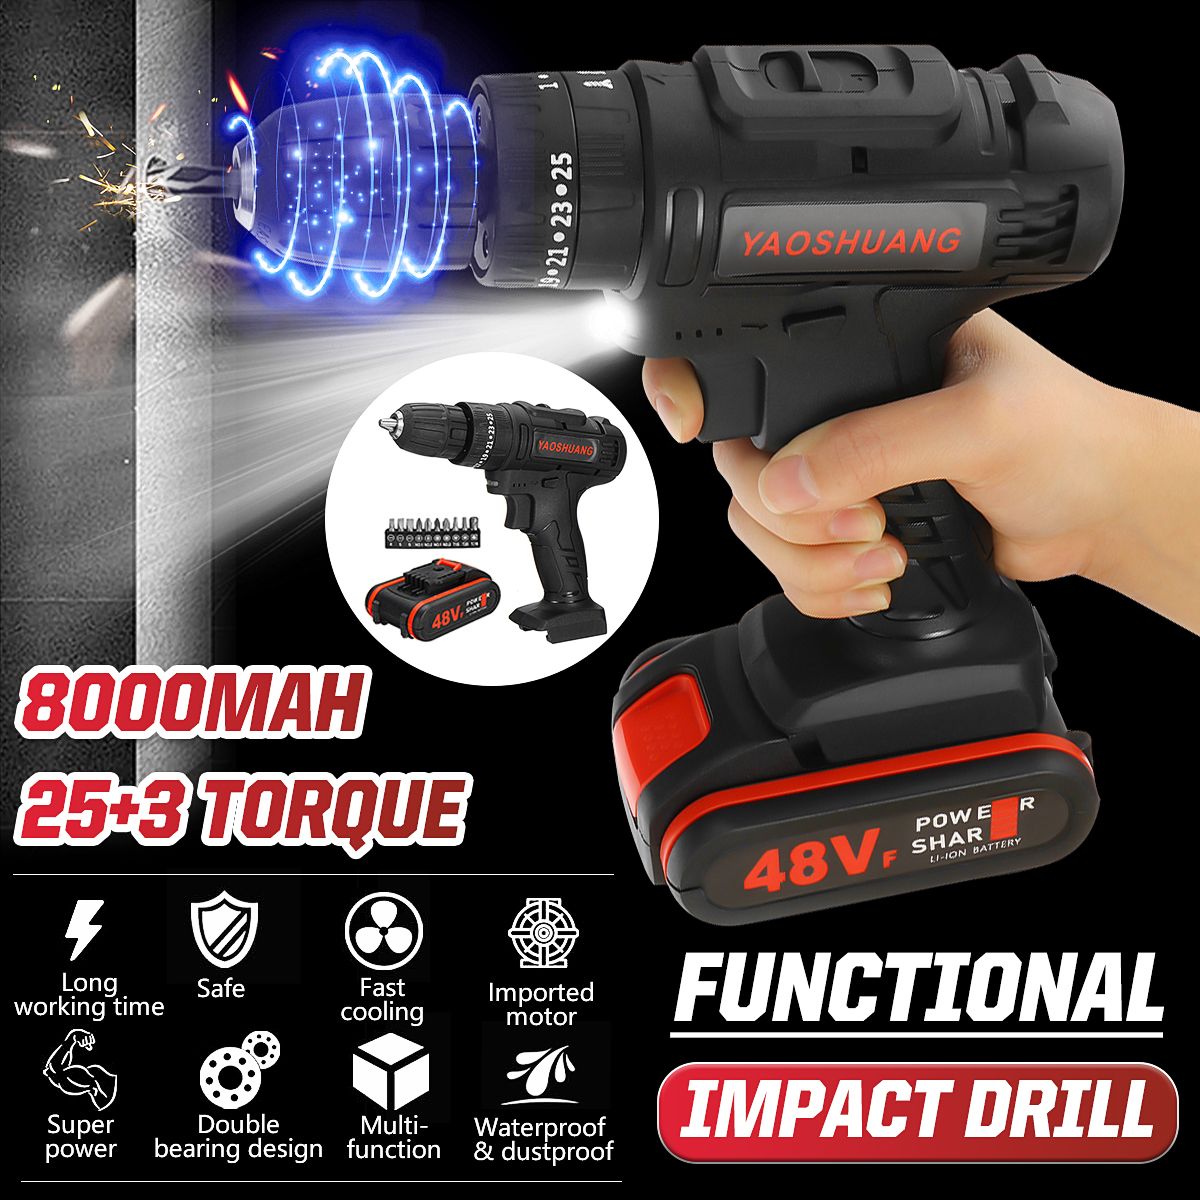 48V-38-Cordless-Rechargeable-Electric-Impact-Hammer-Driver-Drill-2-Battery-1631961